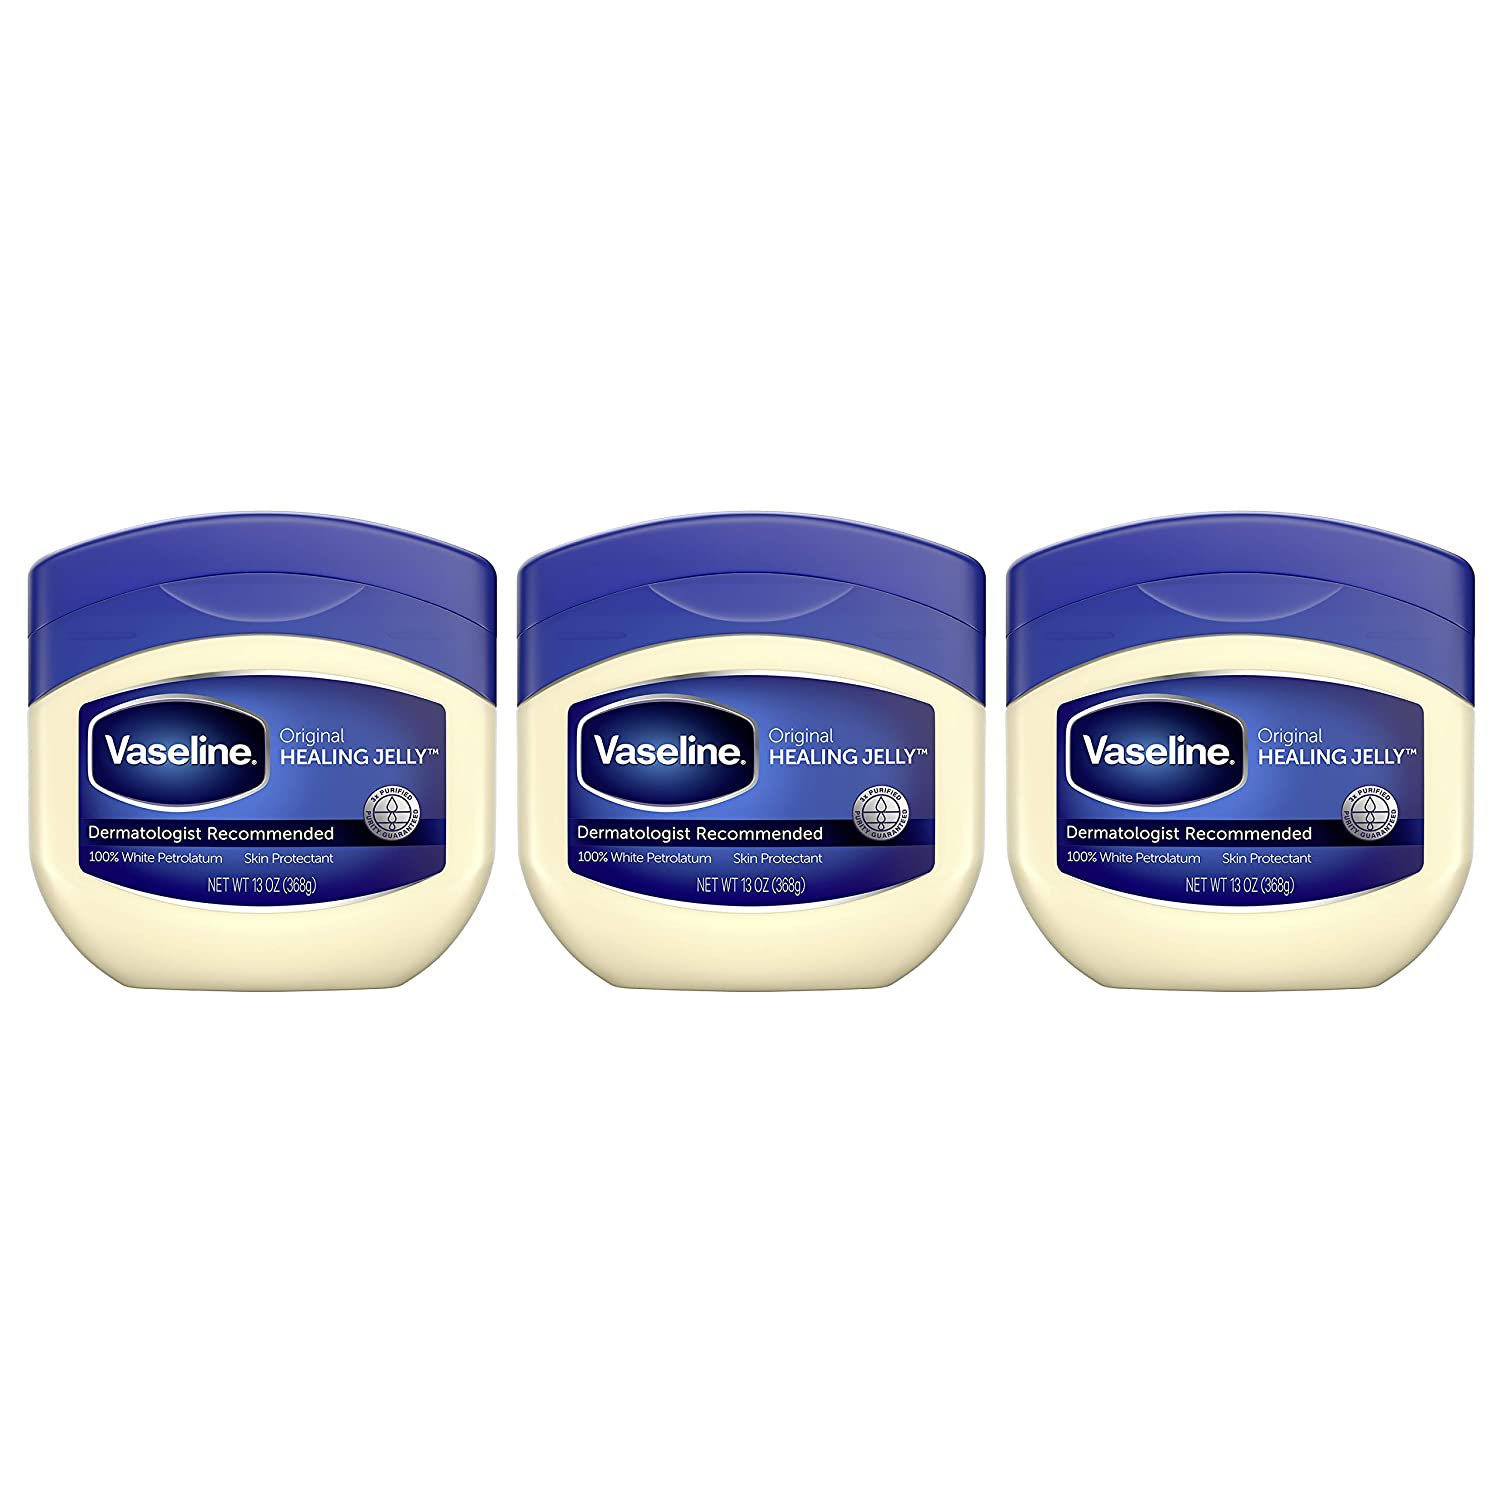 Vaseline Petroleum Jelly, Original, Packaging may vary ,. 13 Ounce (Pack of 3)